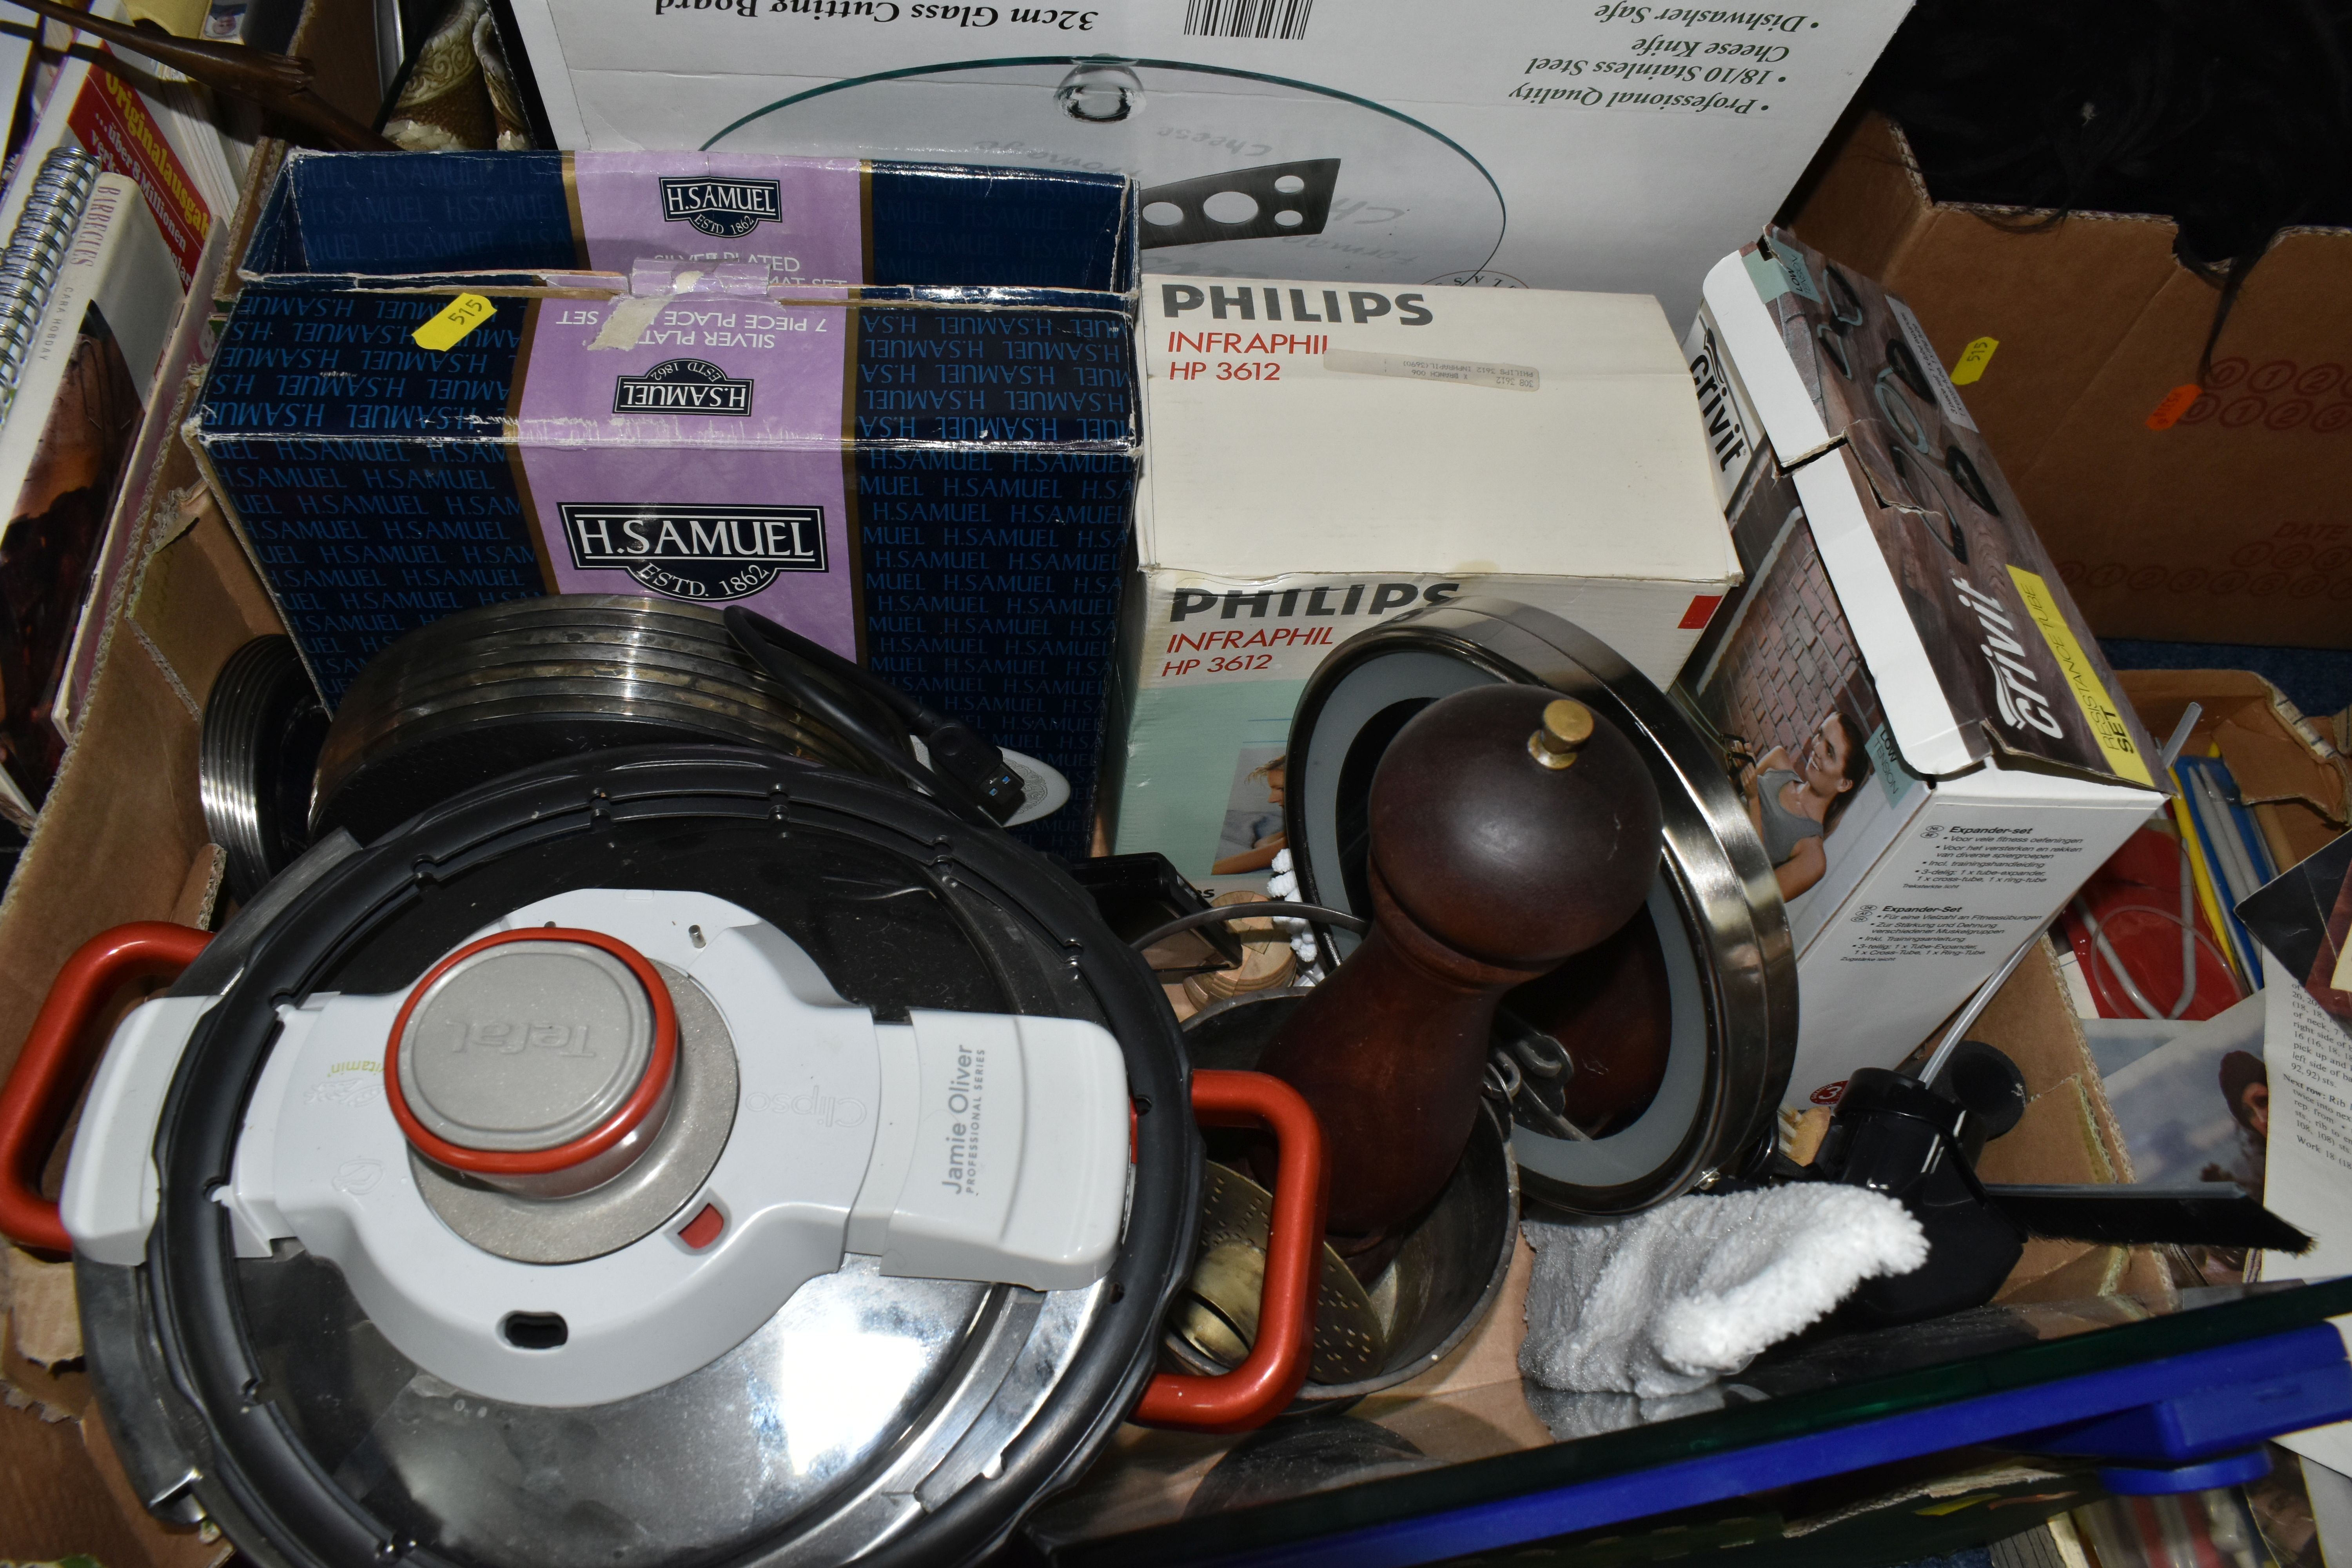 FIVE BOXES OF HOUSEHOLD EQUIPMENT, KNITTING NEEDLES, CHRISTMAS DECORATIONS, PELHAM HAND PUPPET, ETC, - Image 2 of 7